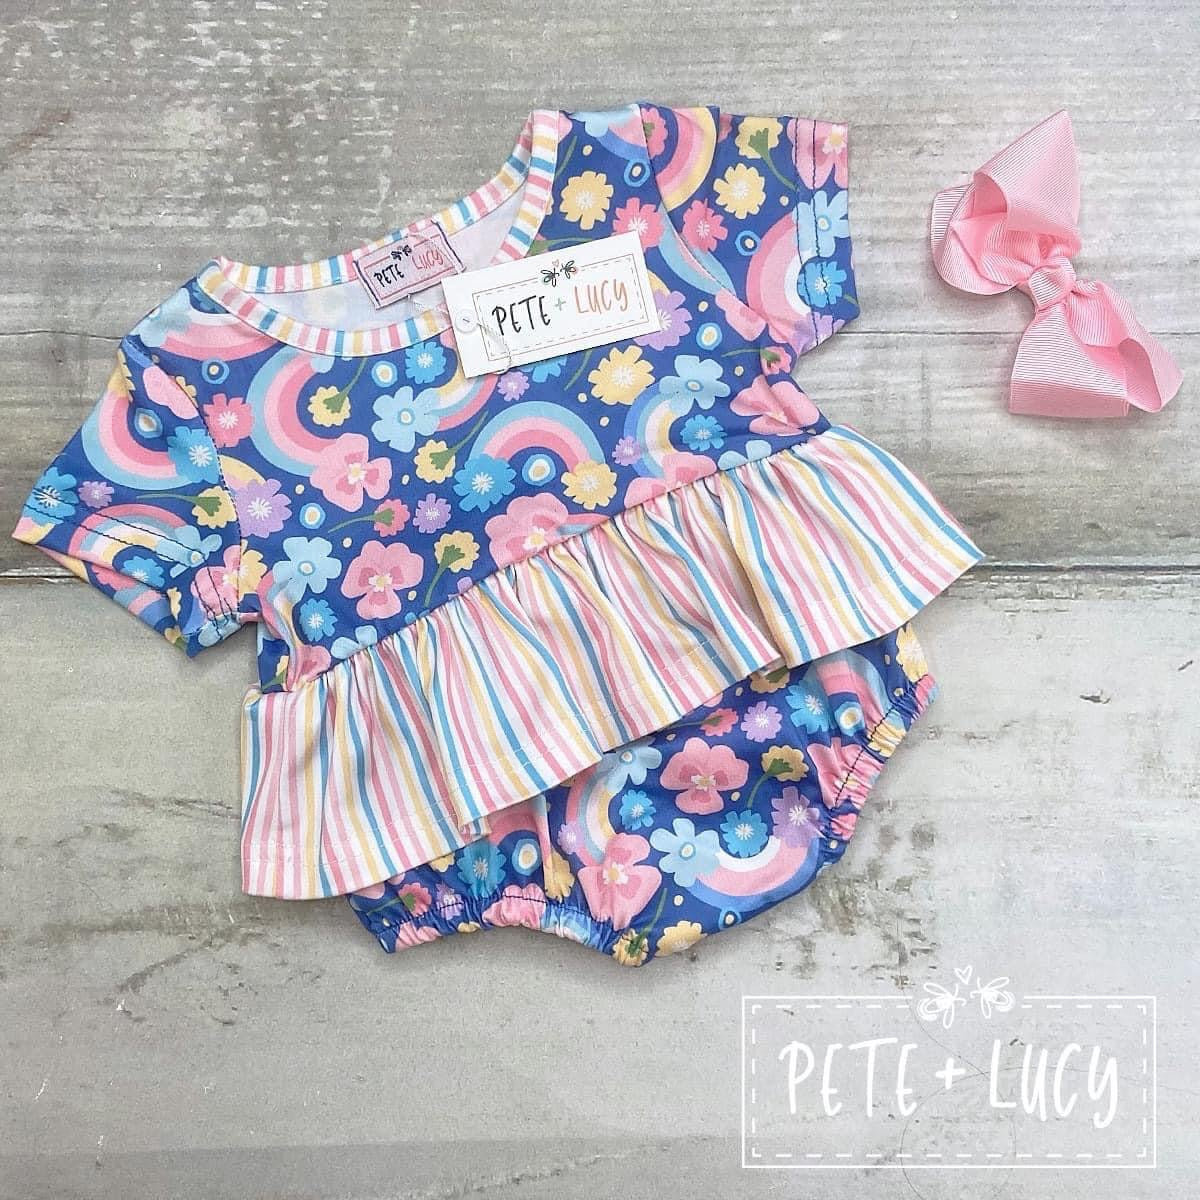 Rainbow Bright Infant Girl's Romper by Pete + Lucy